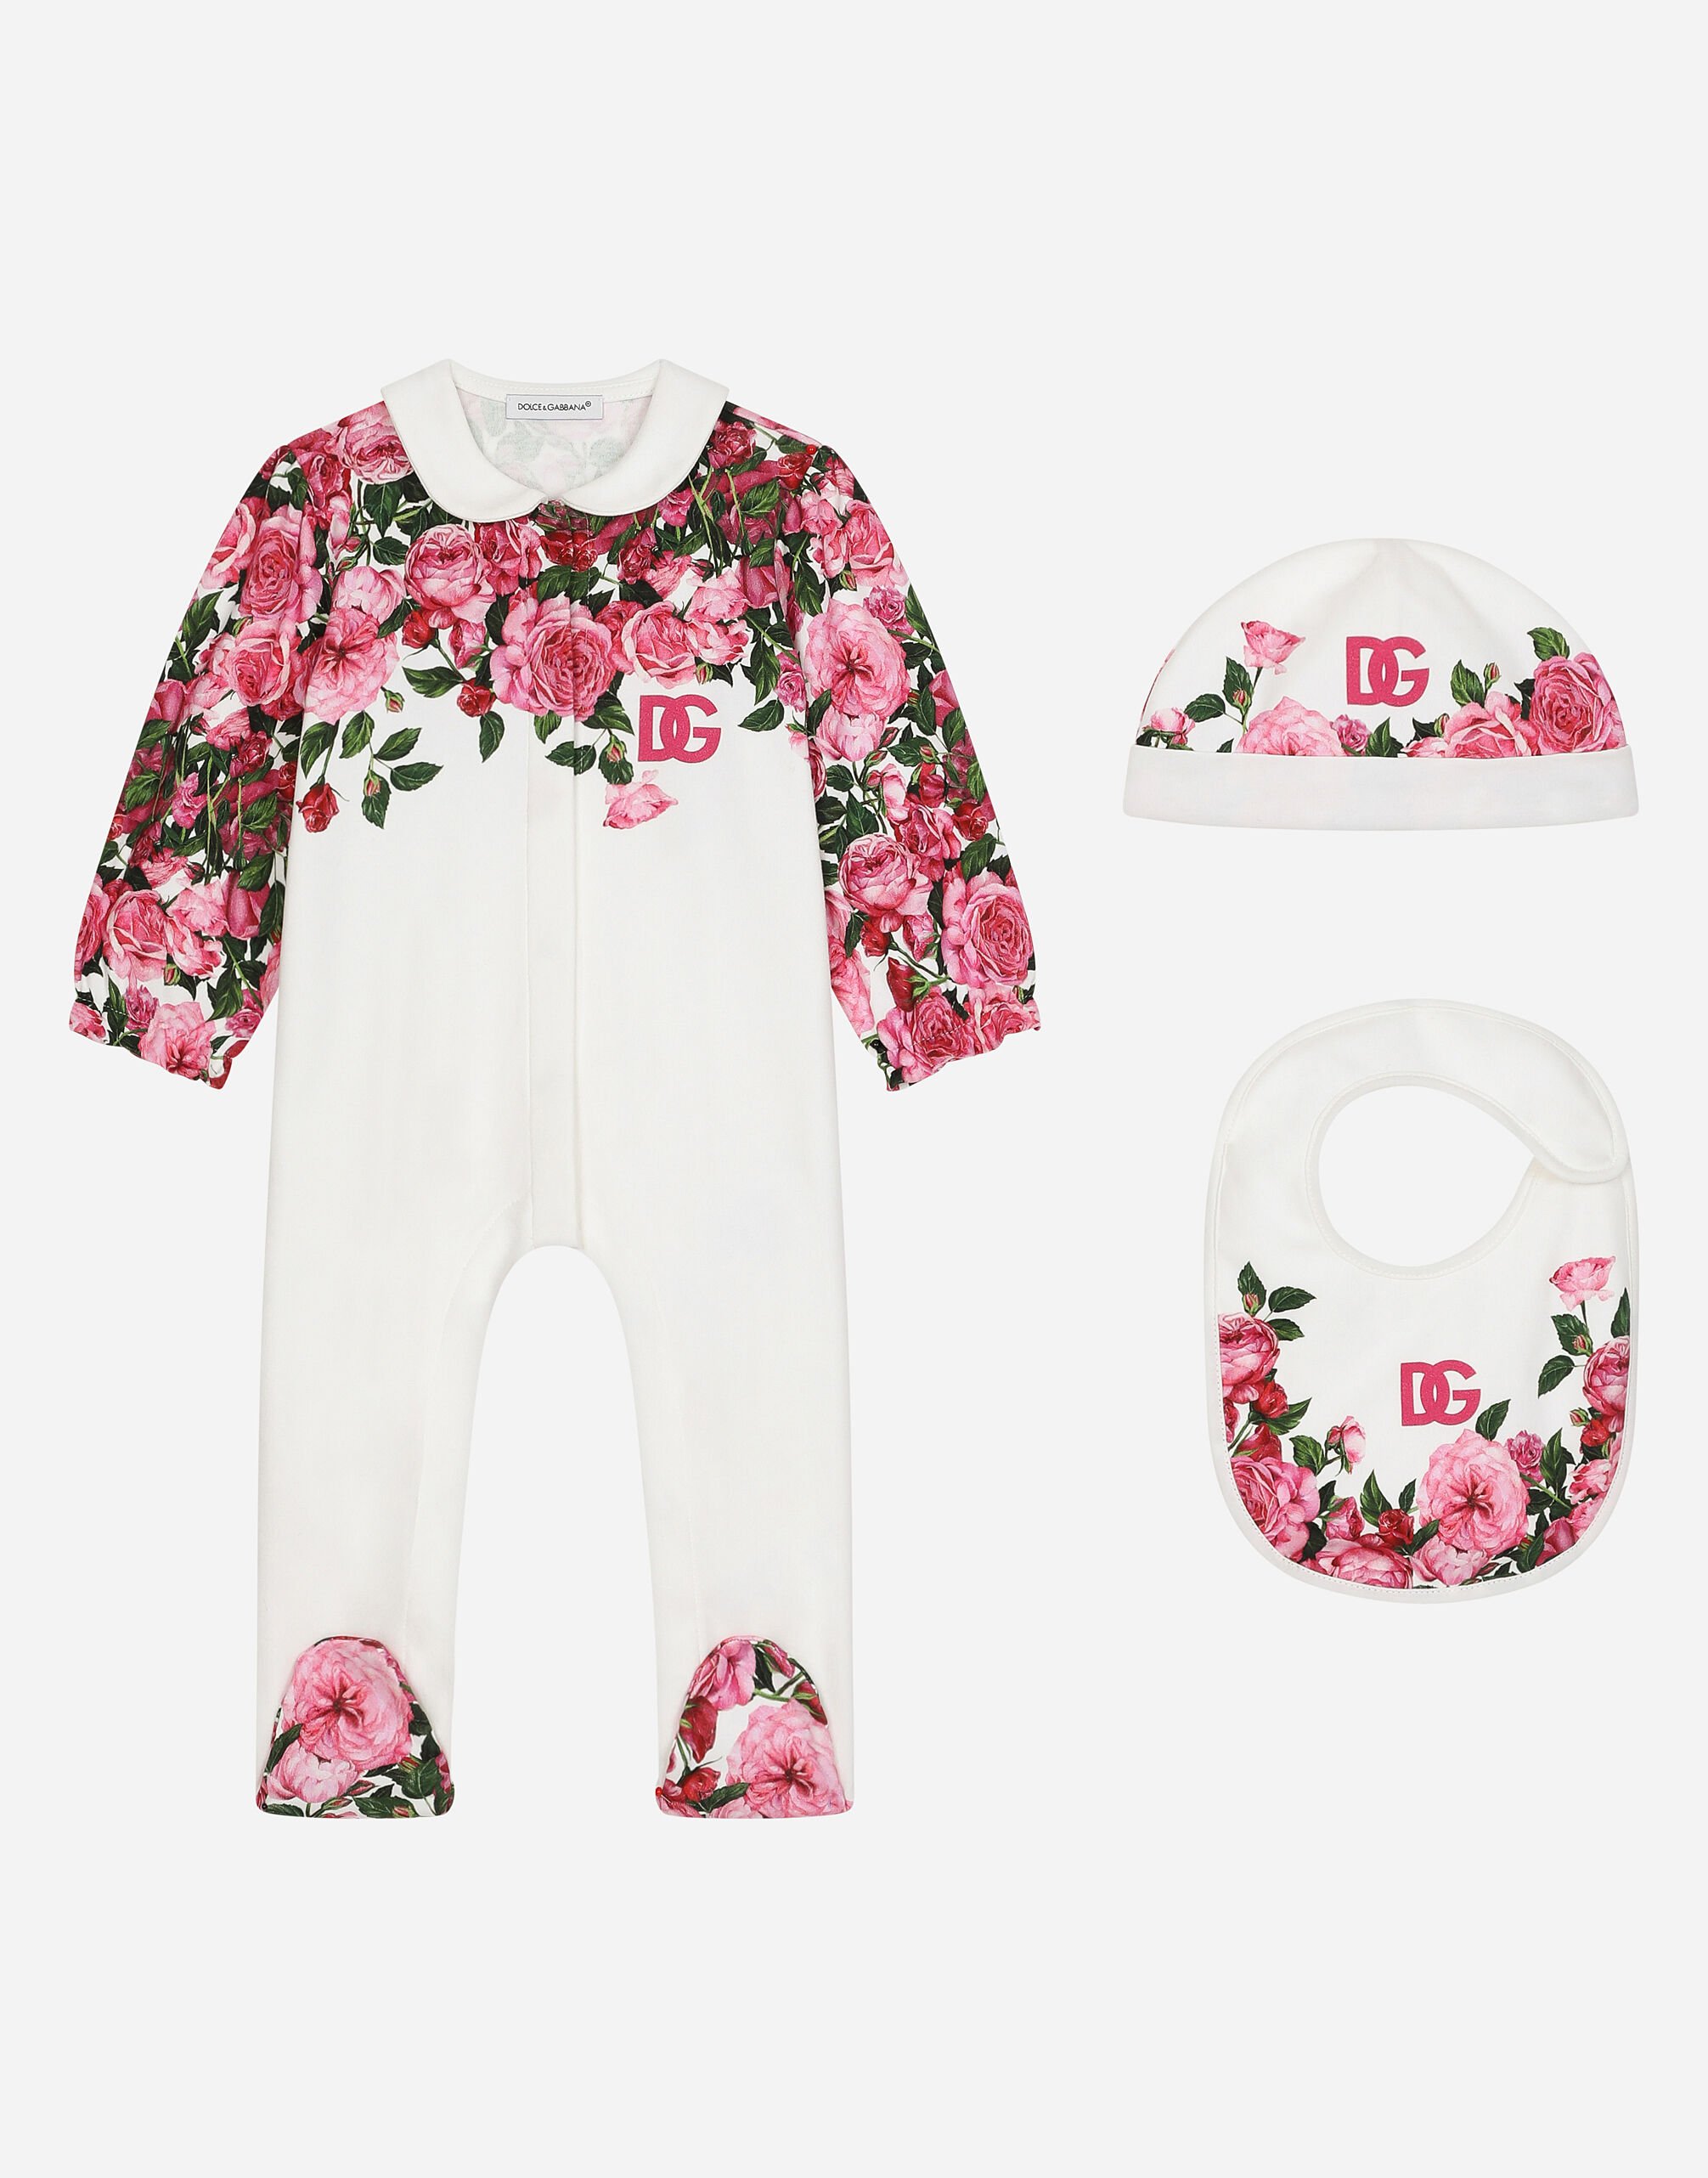 ${brand} 3-piece interlock gift set with rose print over a white background ${colorDescription} ${masterID}